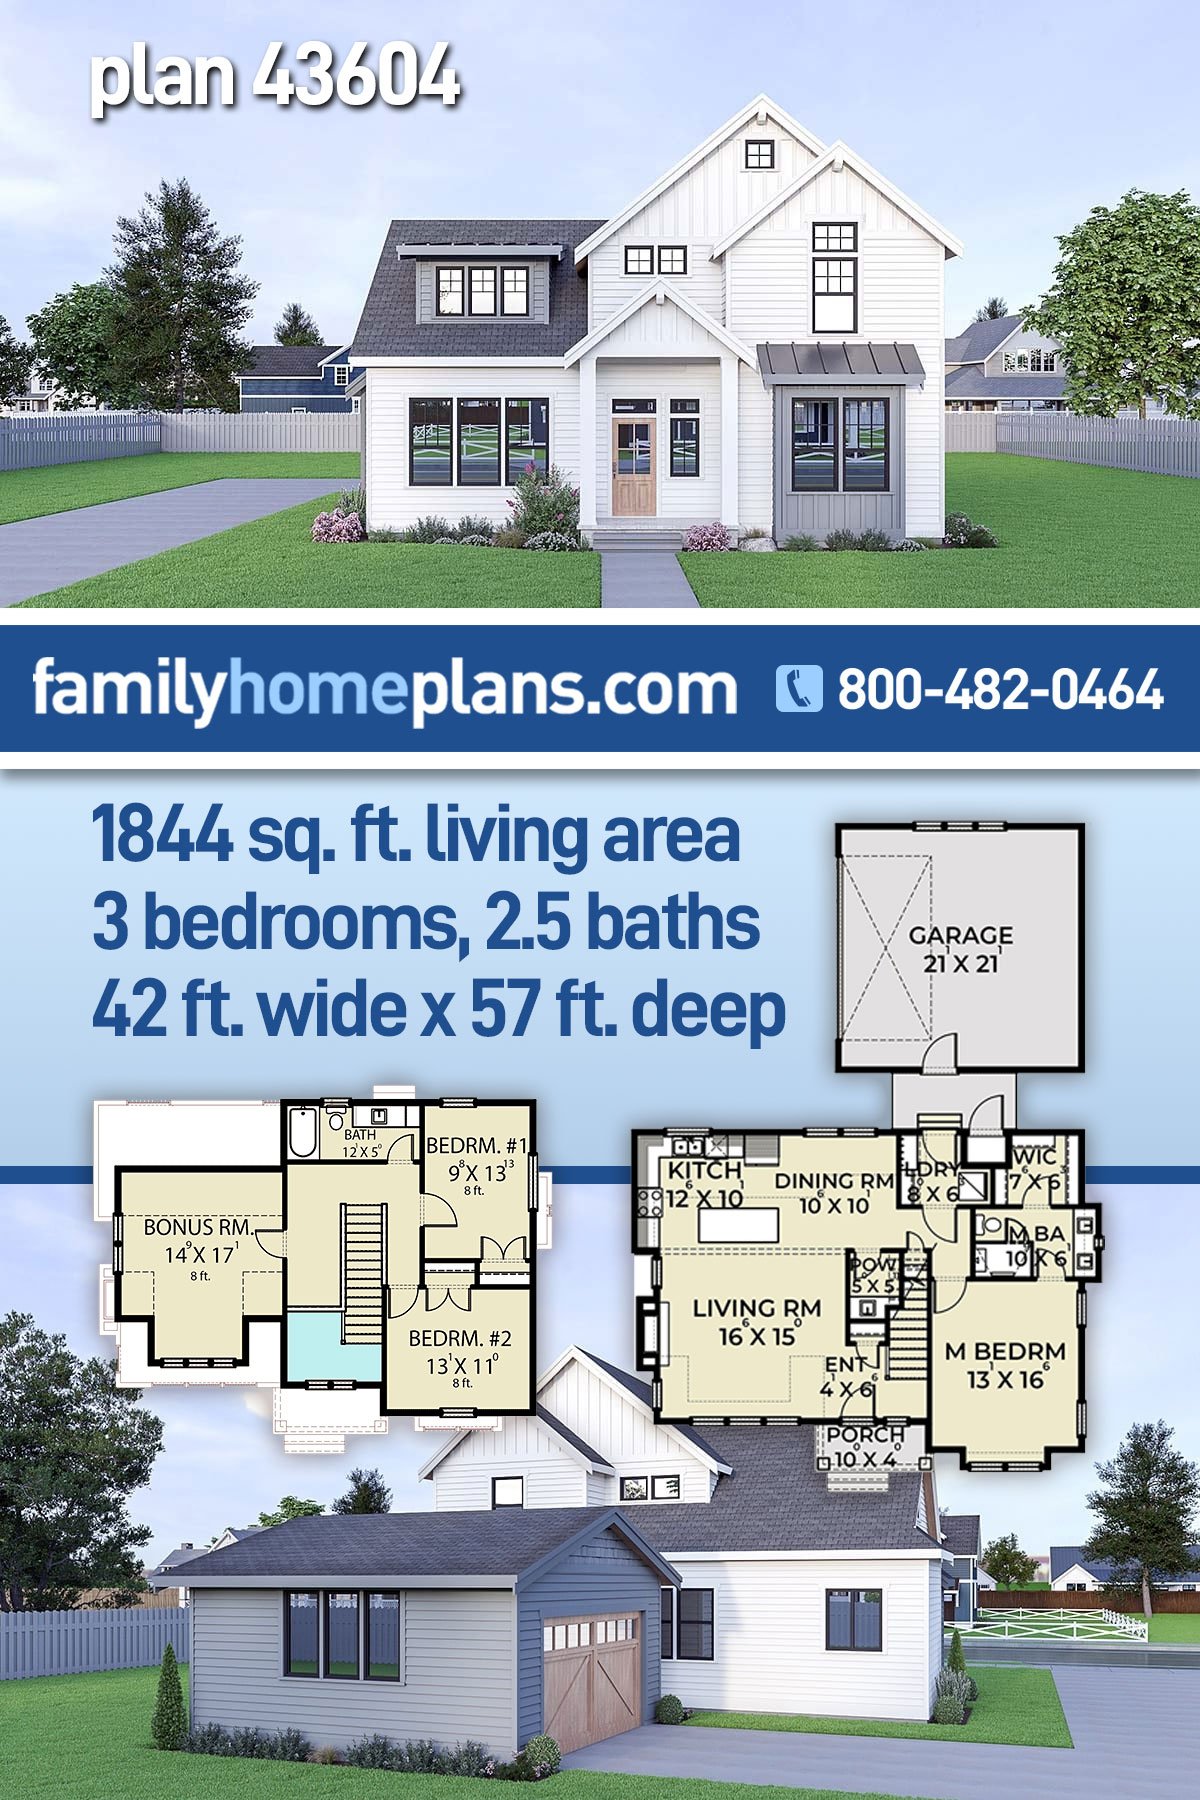 Plan 43604 | Country Farmhouse Plan with Rear Entry Garage